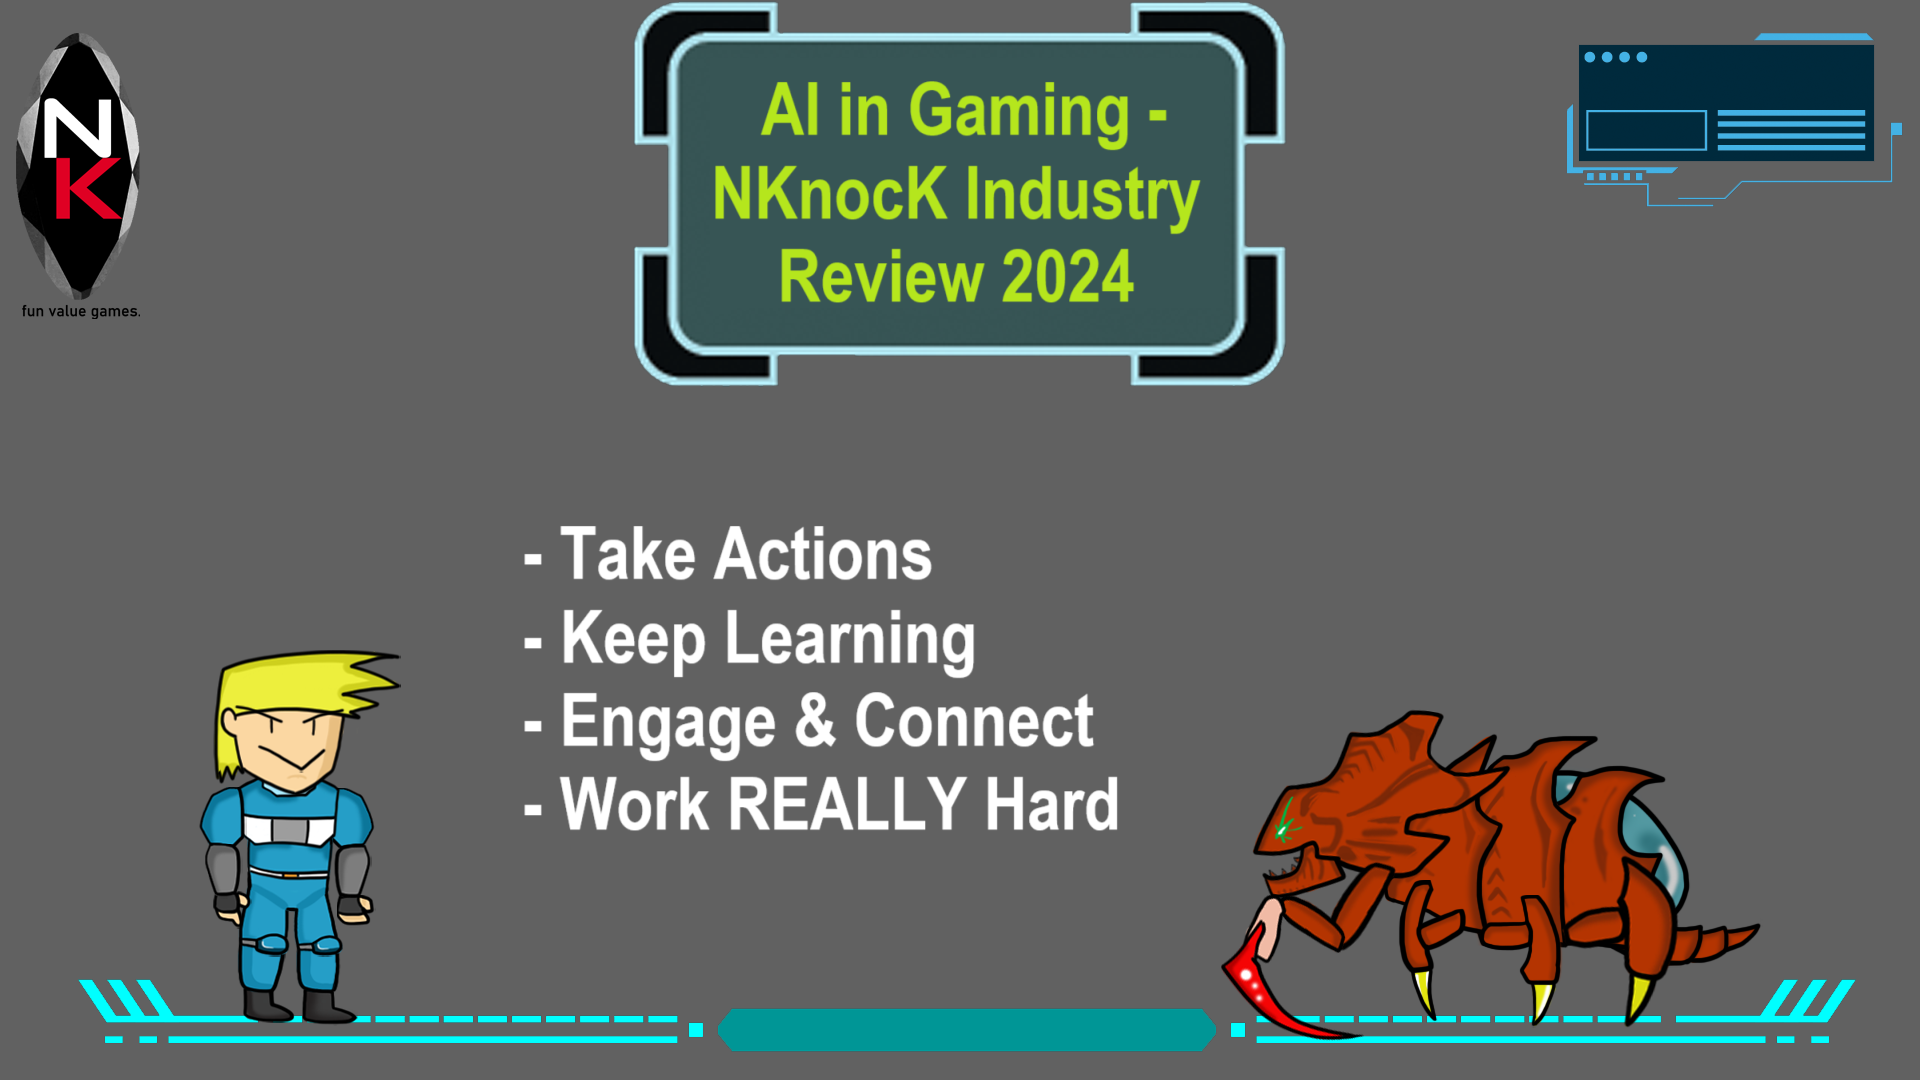 AI in Gaming - NKnocK Industry Review 2024